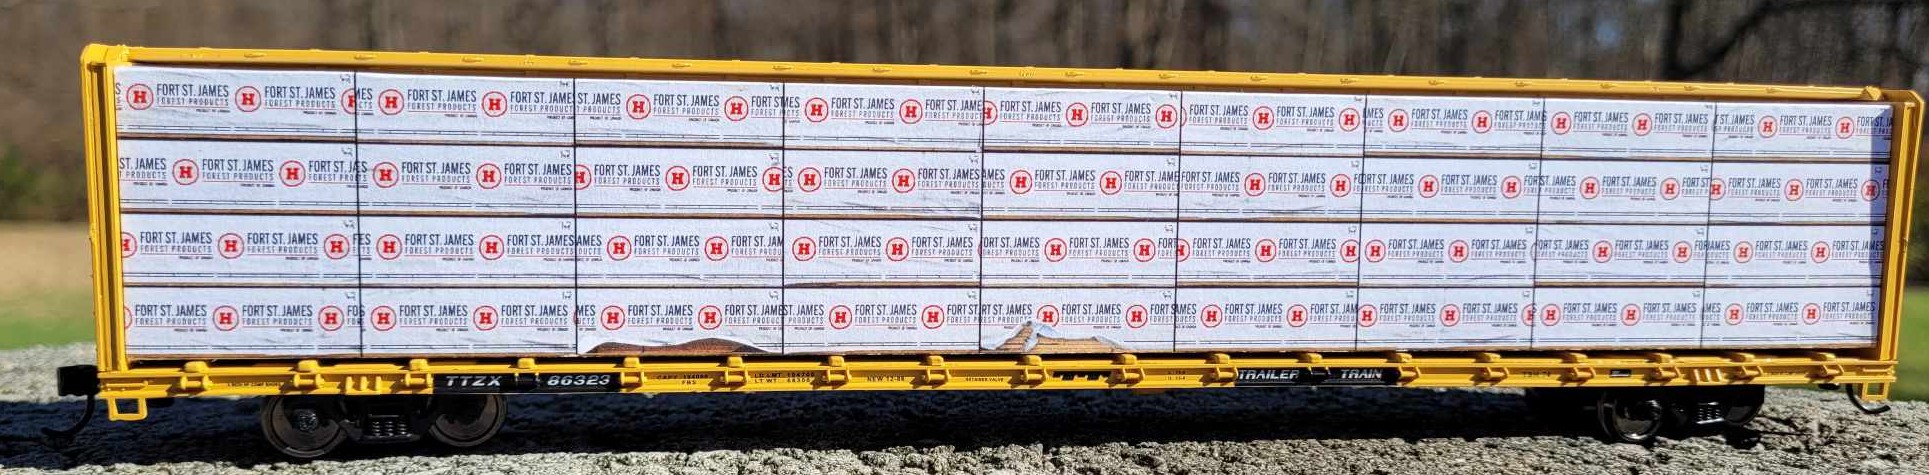 N Scale - Columbus Trainmaster - 72162N - Accessories, Load, Centerbeam,Wrapped - Painted/Lettered - Fort St. James Forest Products